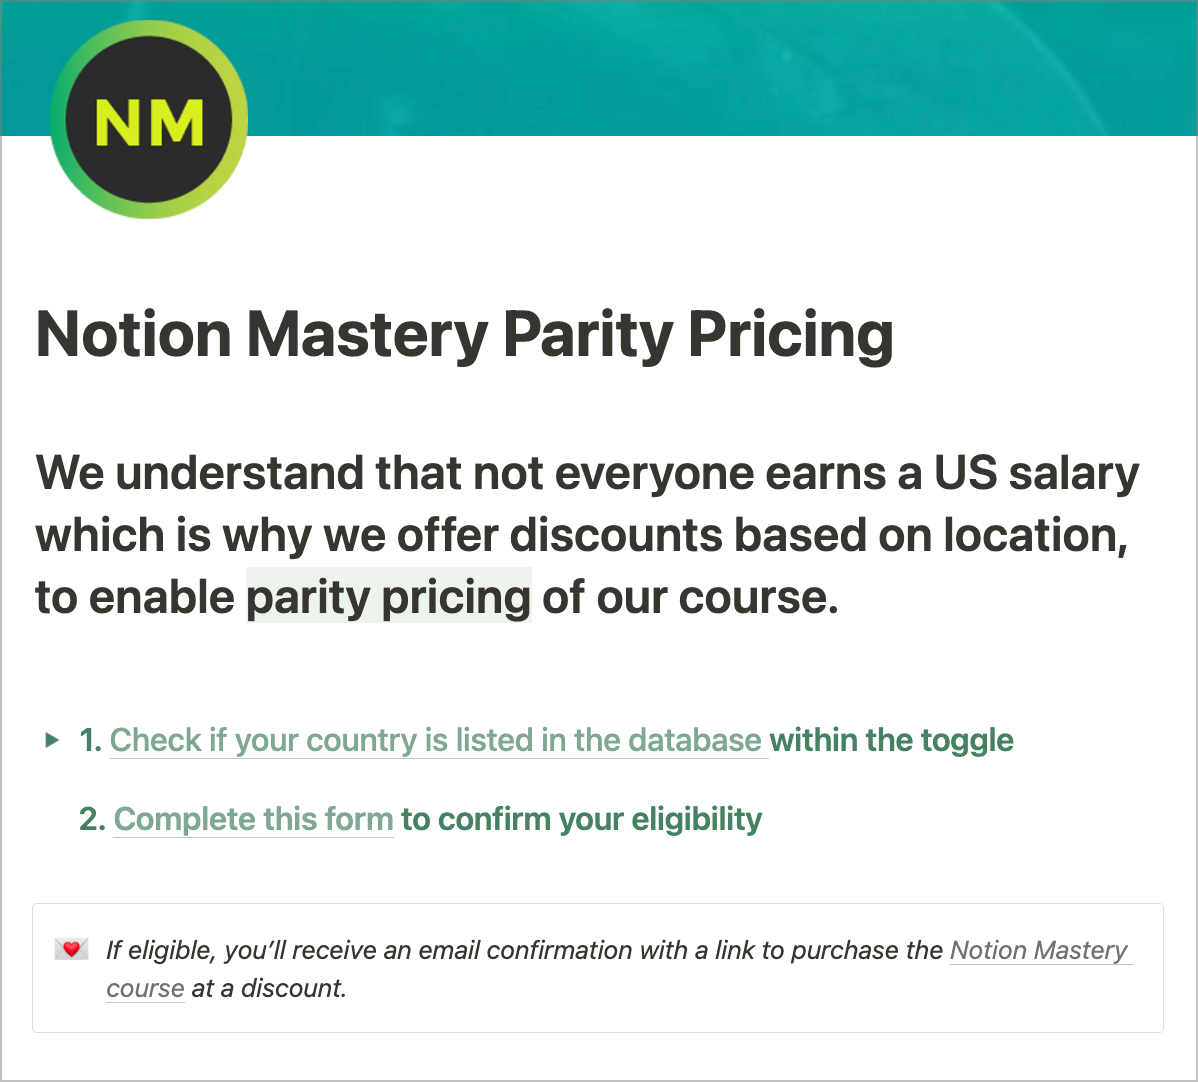 The Notion page we share with information about parity pricing.